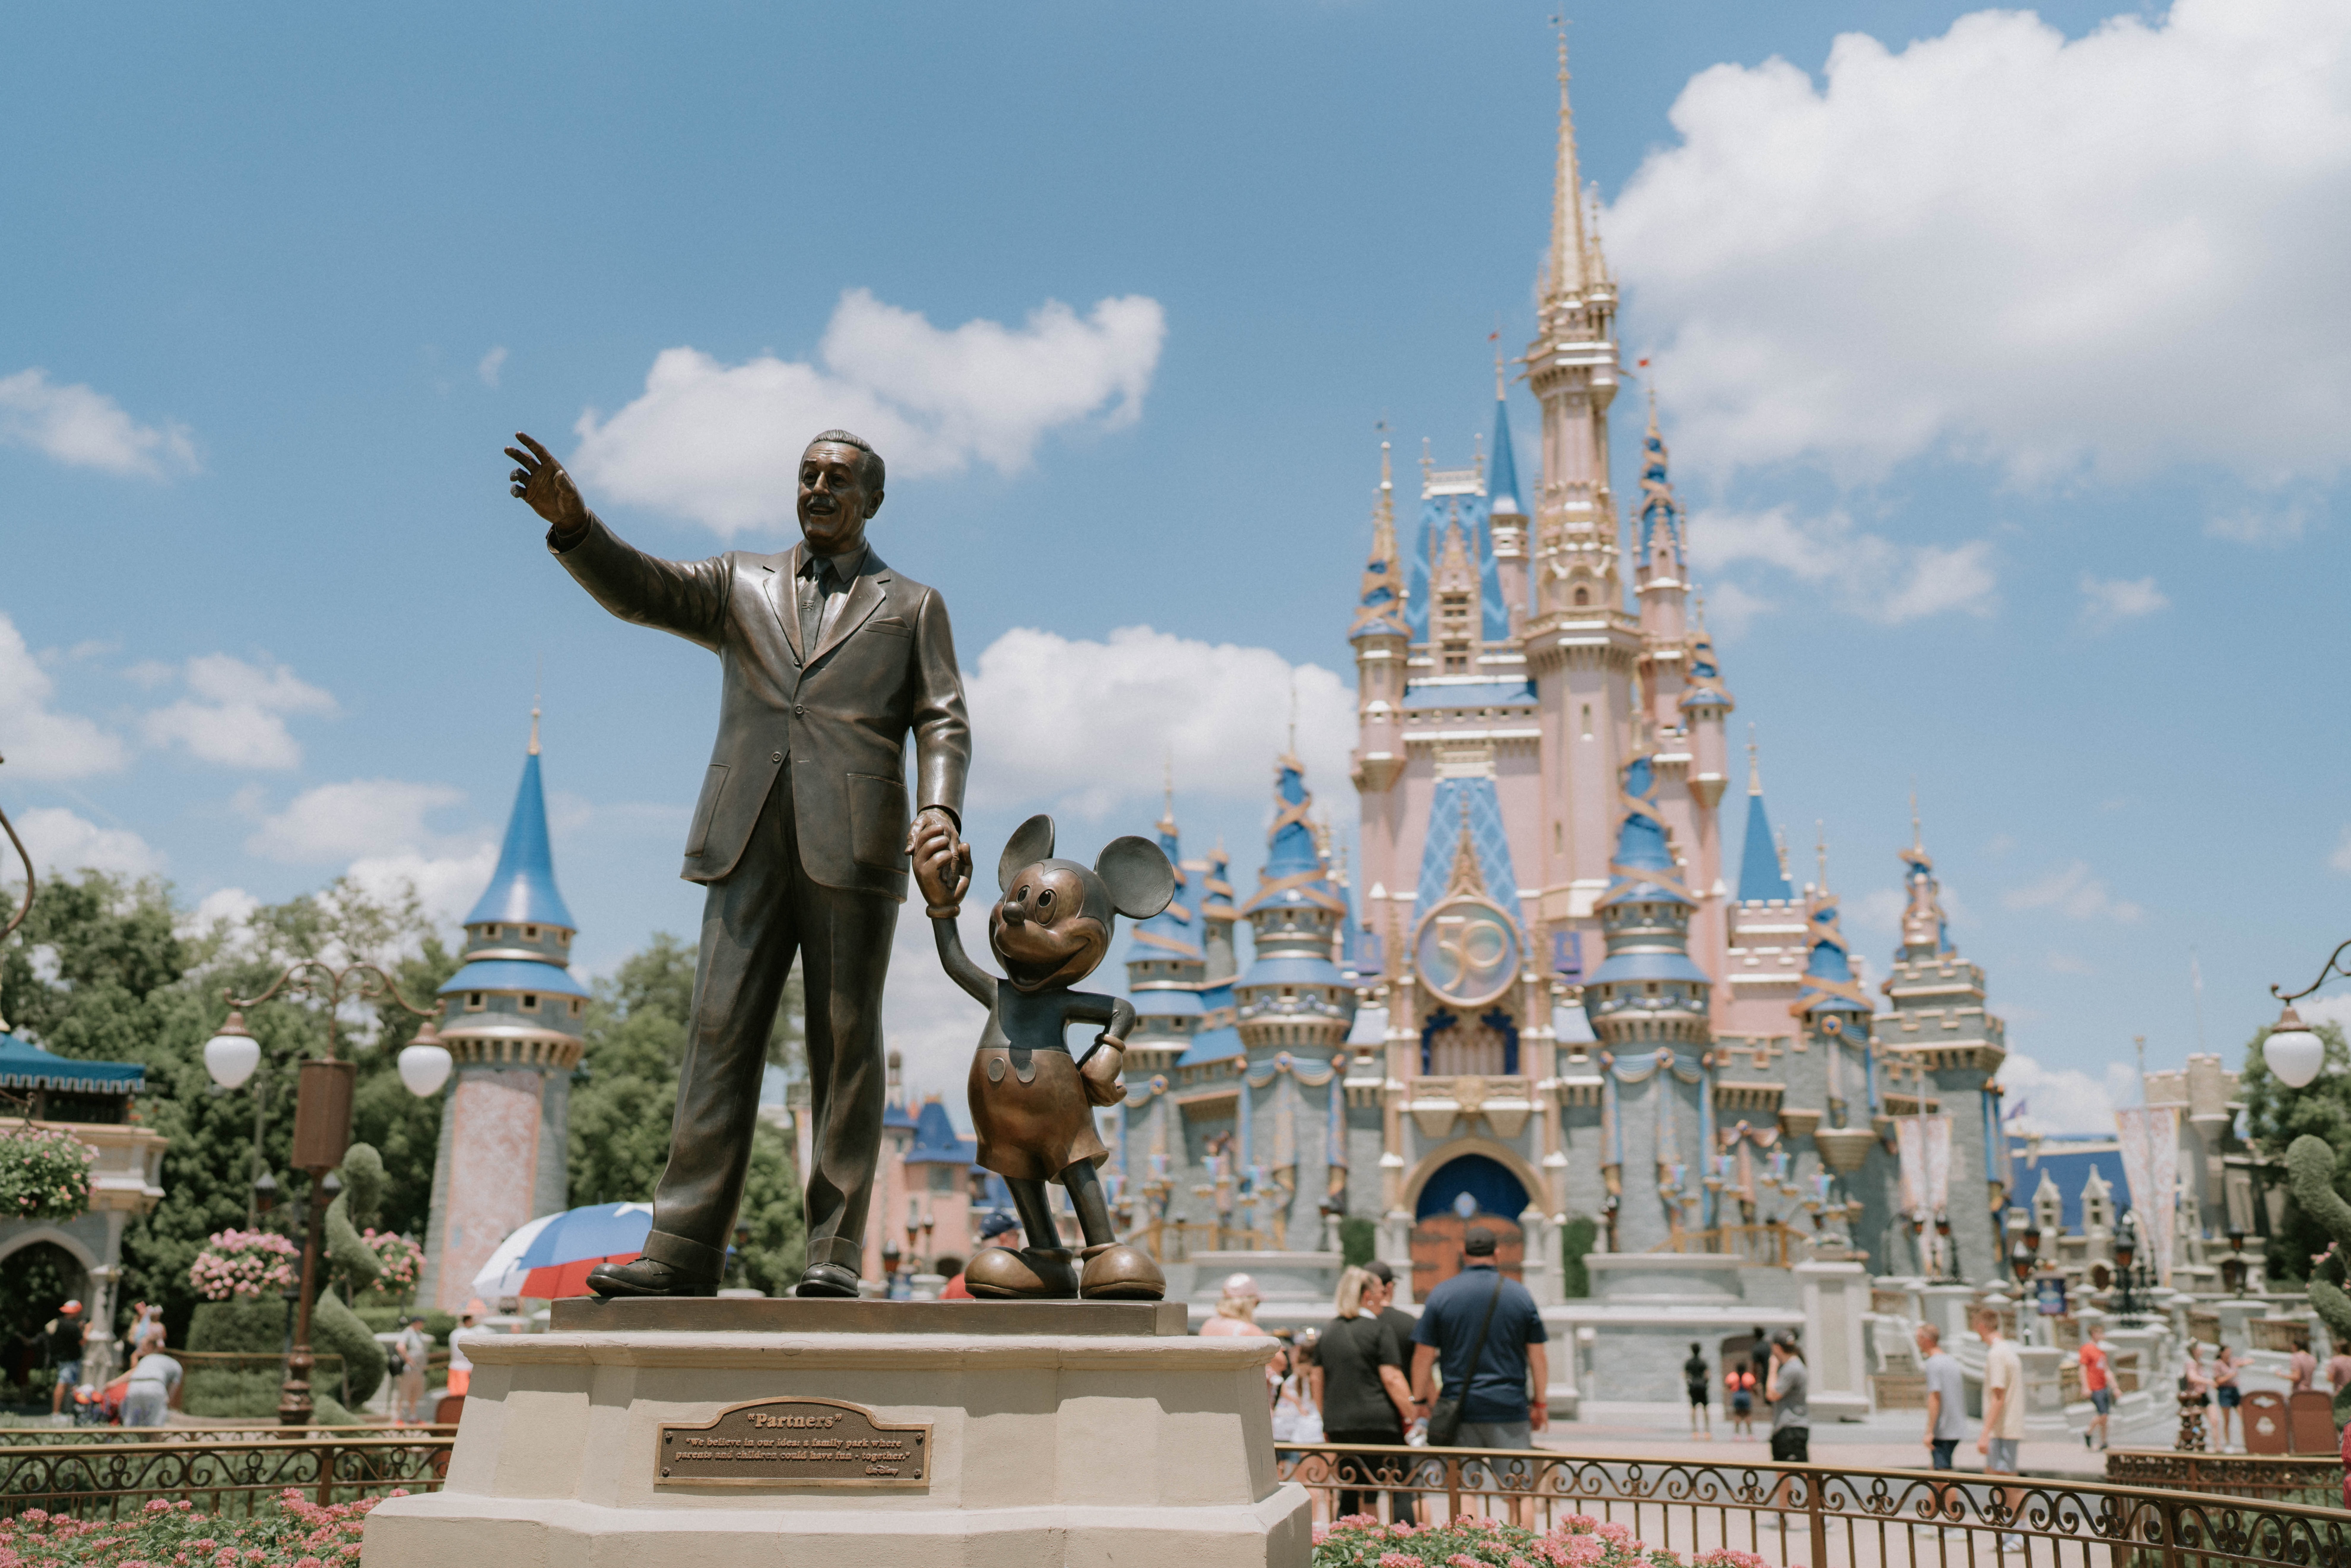 A statue of Walt Disney holding hands with Mickey Mouse in front of Cinderella's Castle